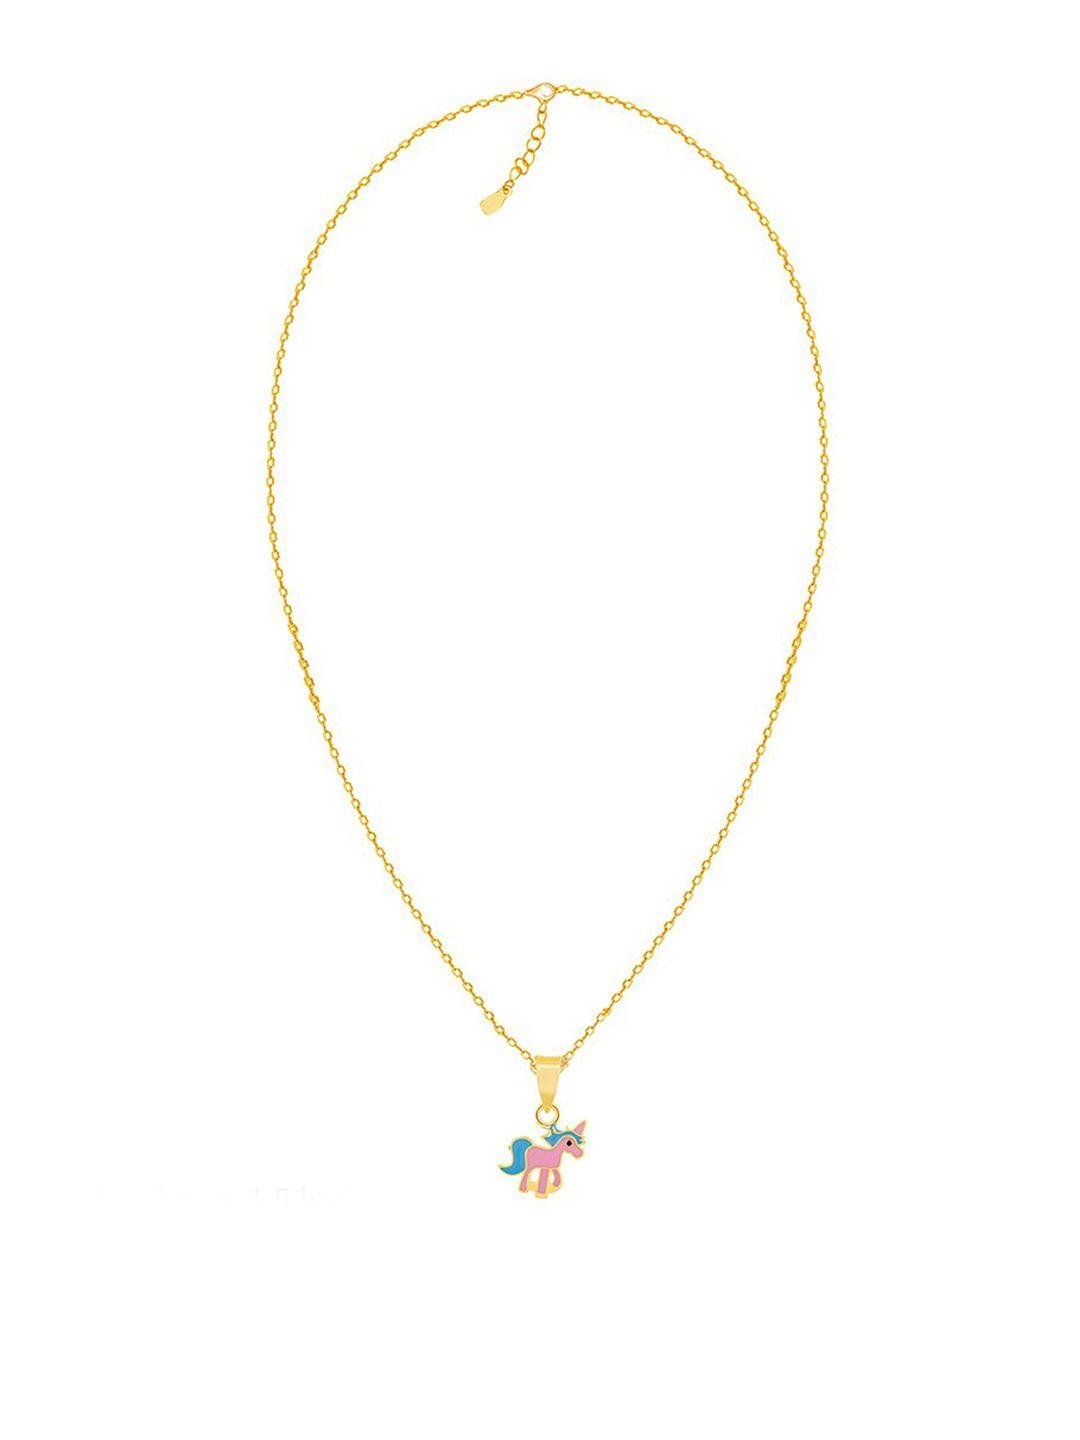 giva girls sterling silver gold-plated blue & pink unicorn pendant with chain